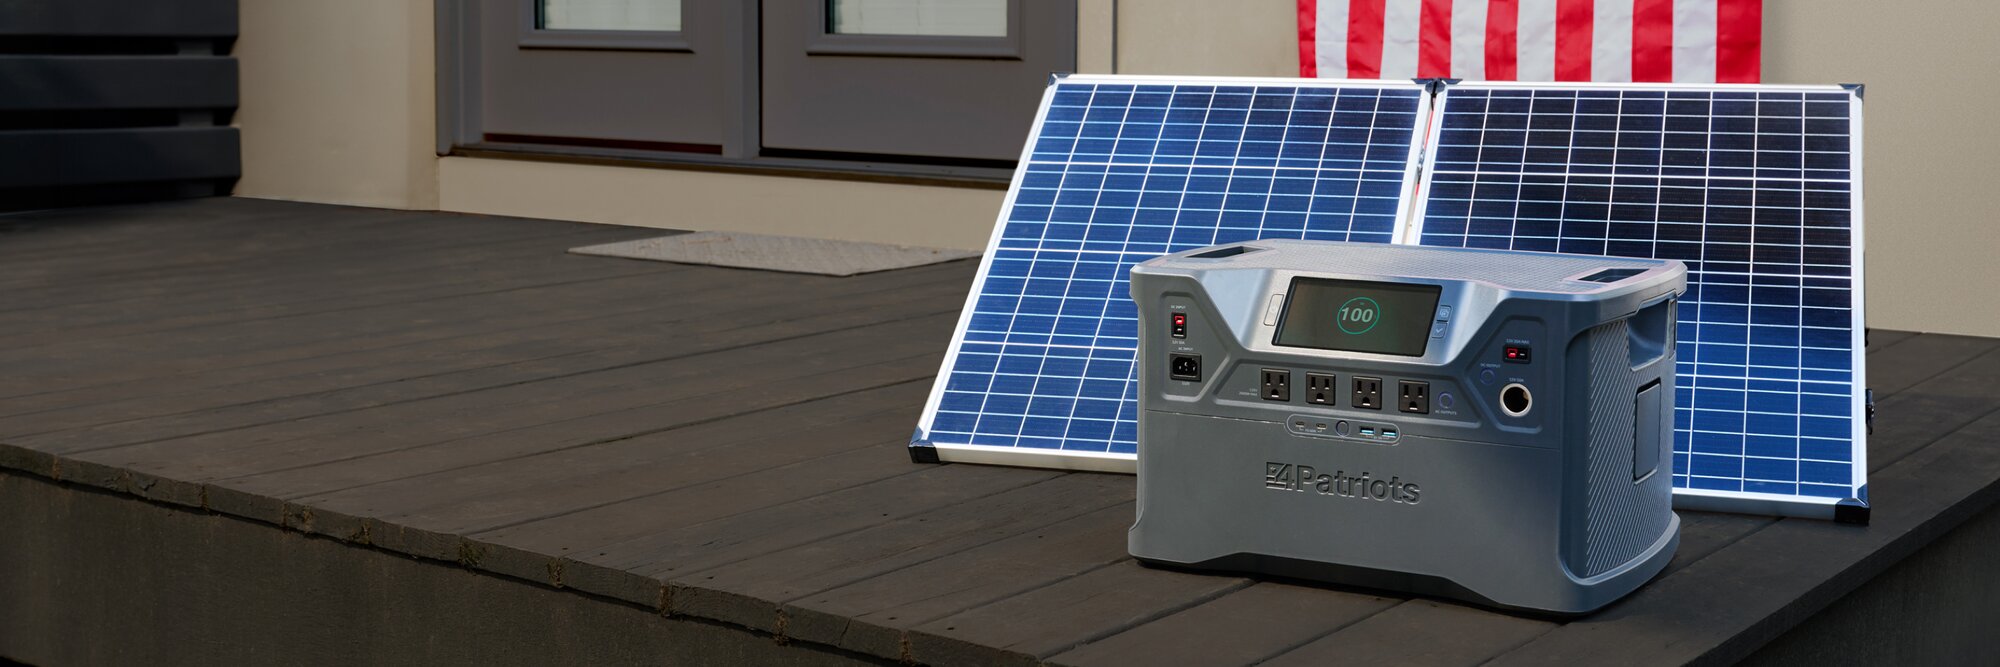 A Patriot Power Generator 2000x sitting outside on someone's porch charging with its solar panel, and an American Flag hanging on the wall